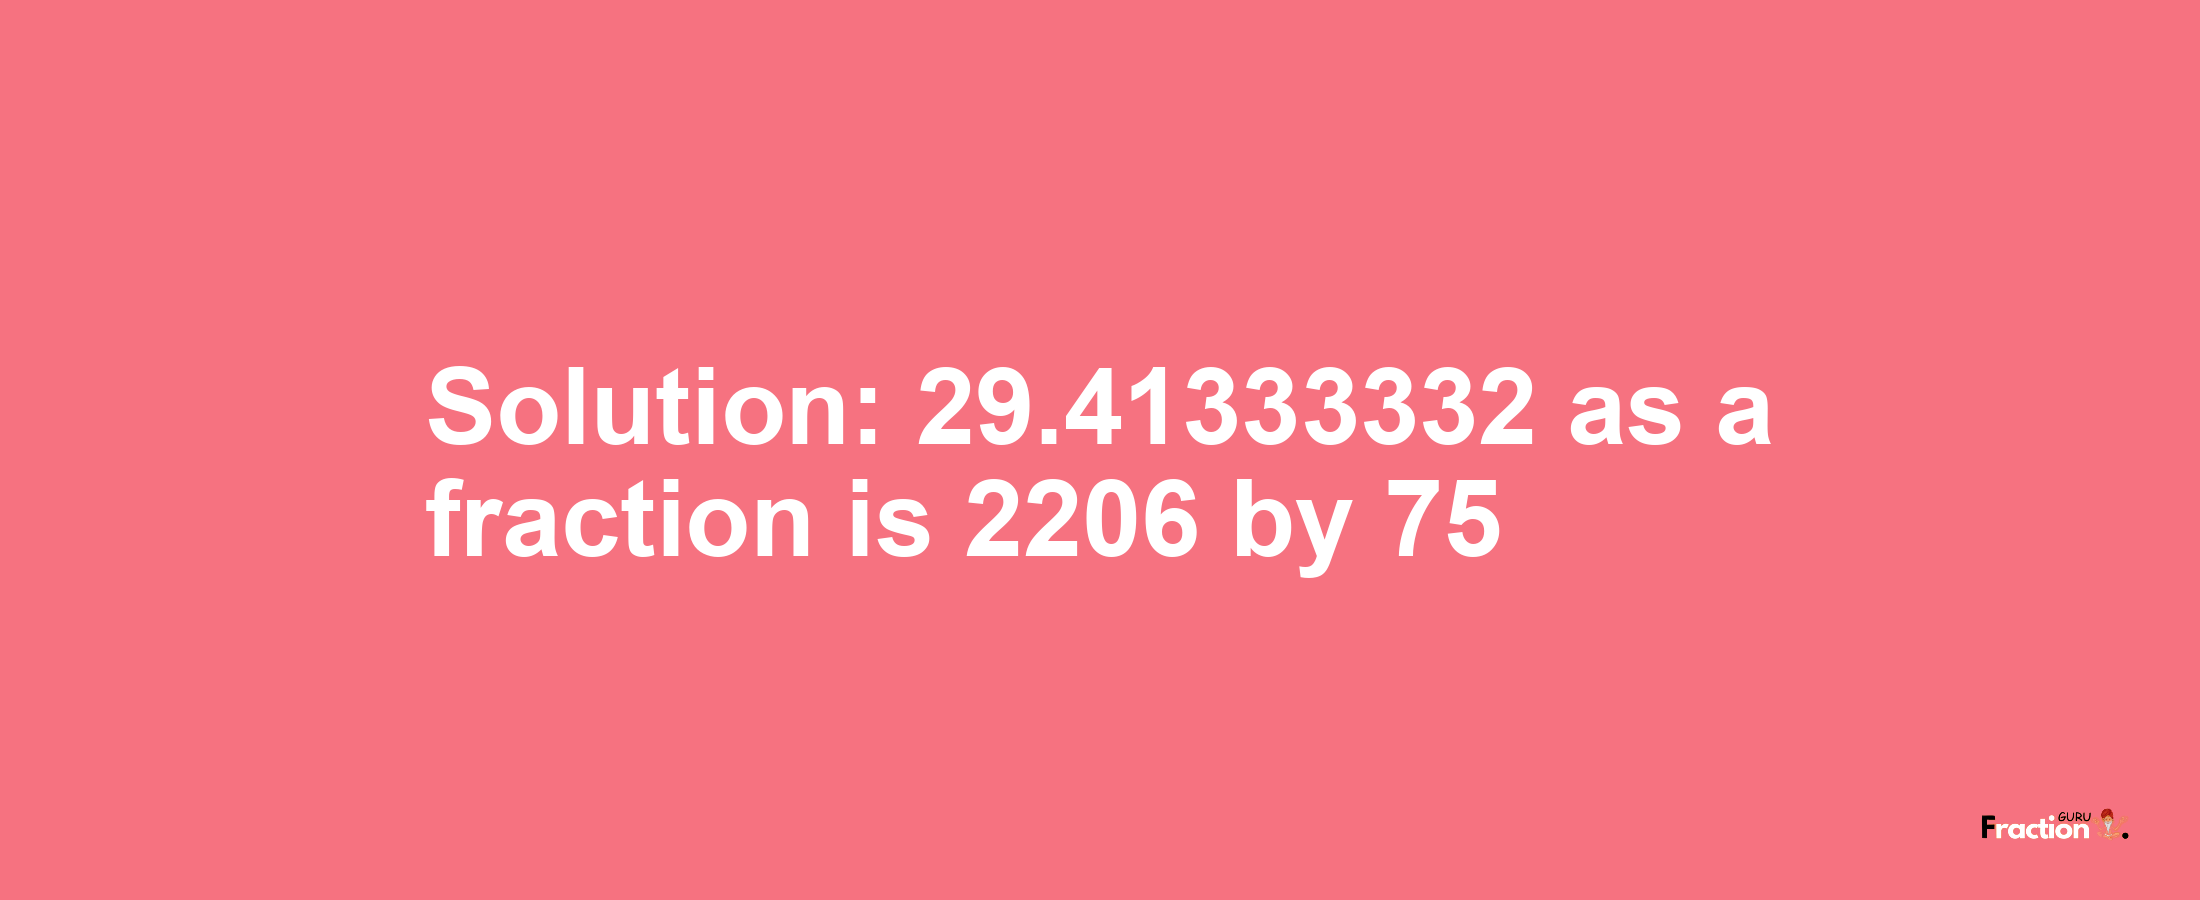 Solution:29.41333332 as a fraction is 2206/75